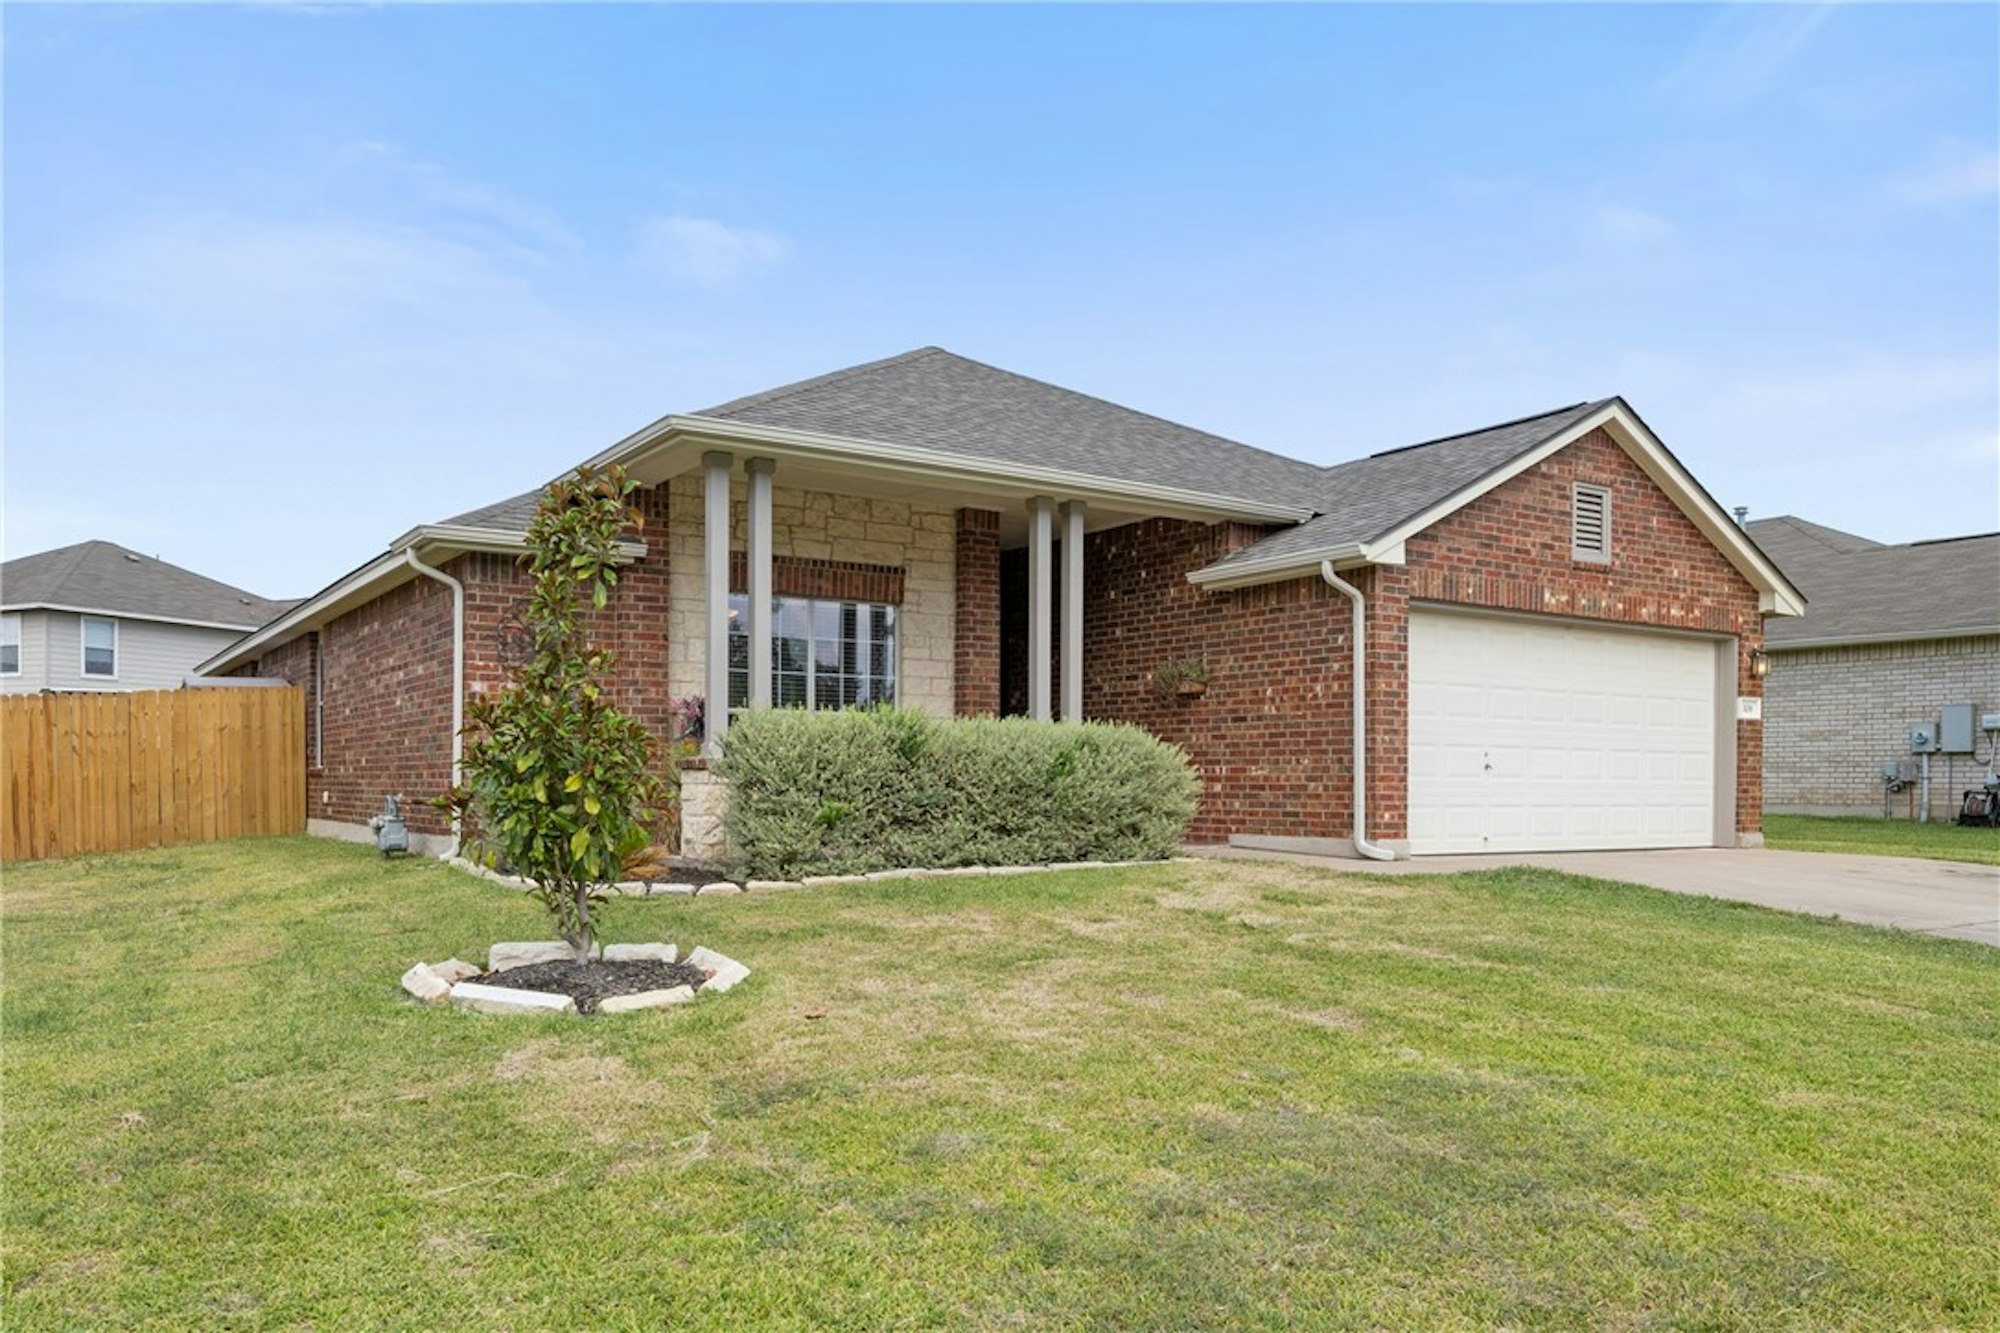 Photo 1 of 27 - 106 Dove Song Dr, Leander, TX 78641